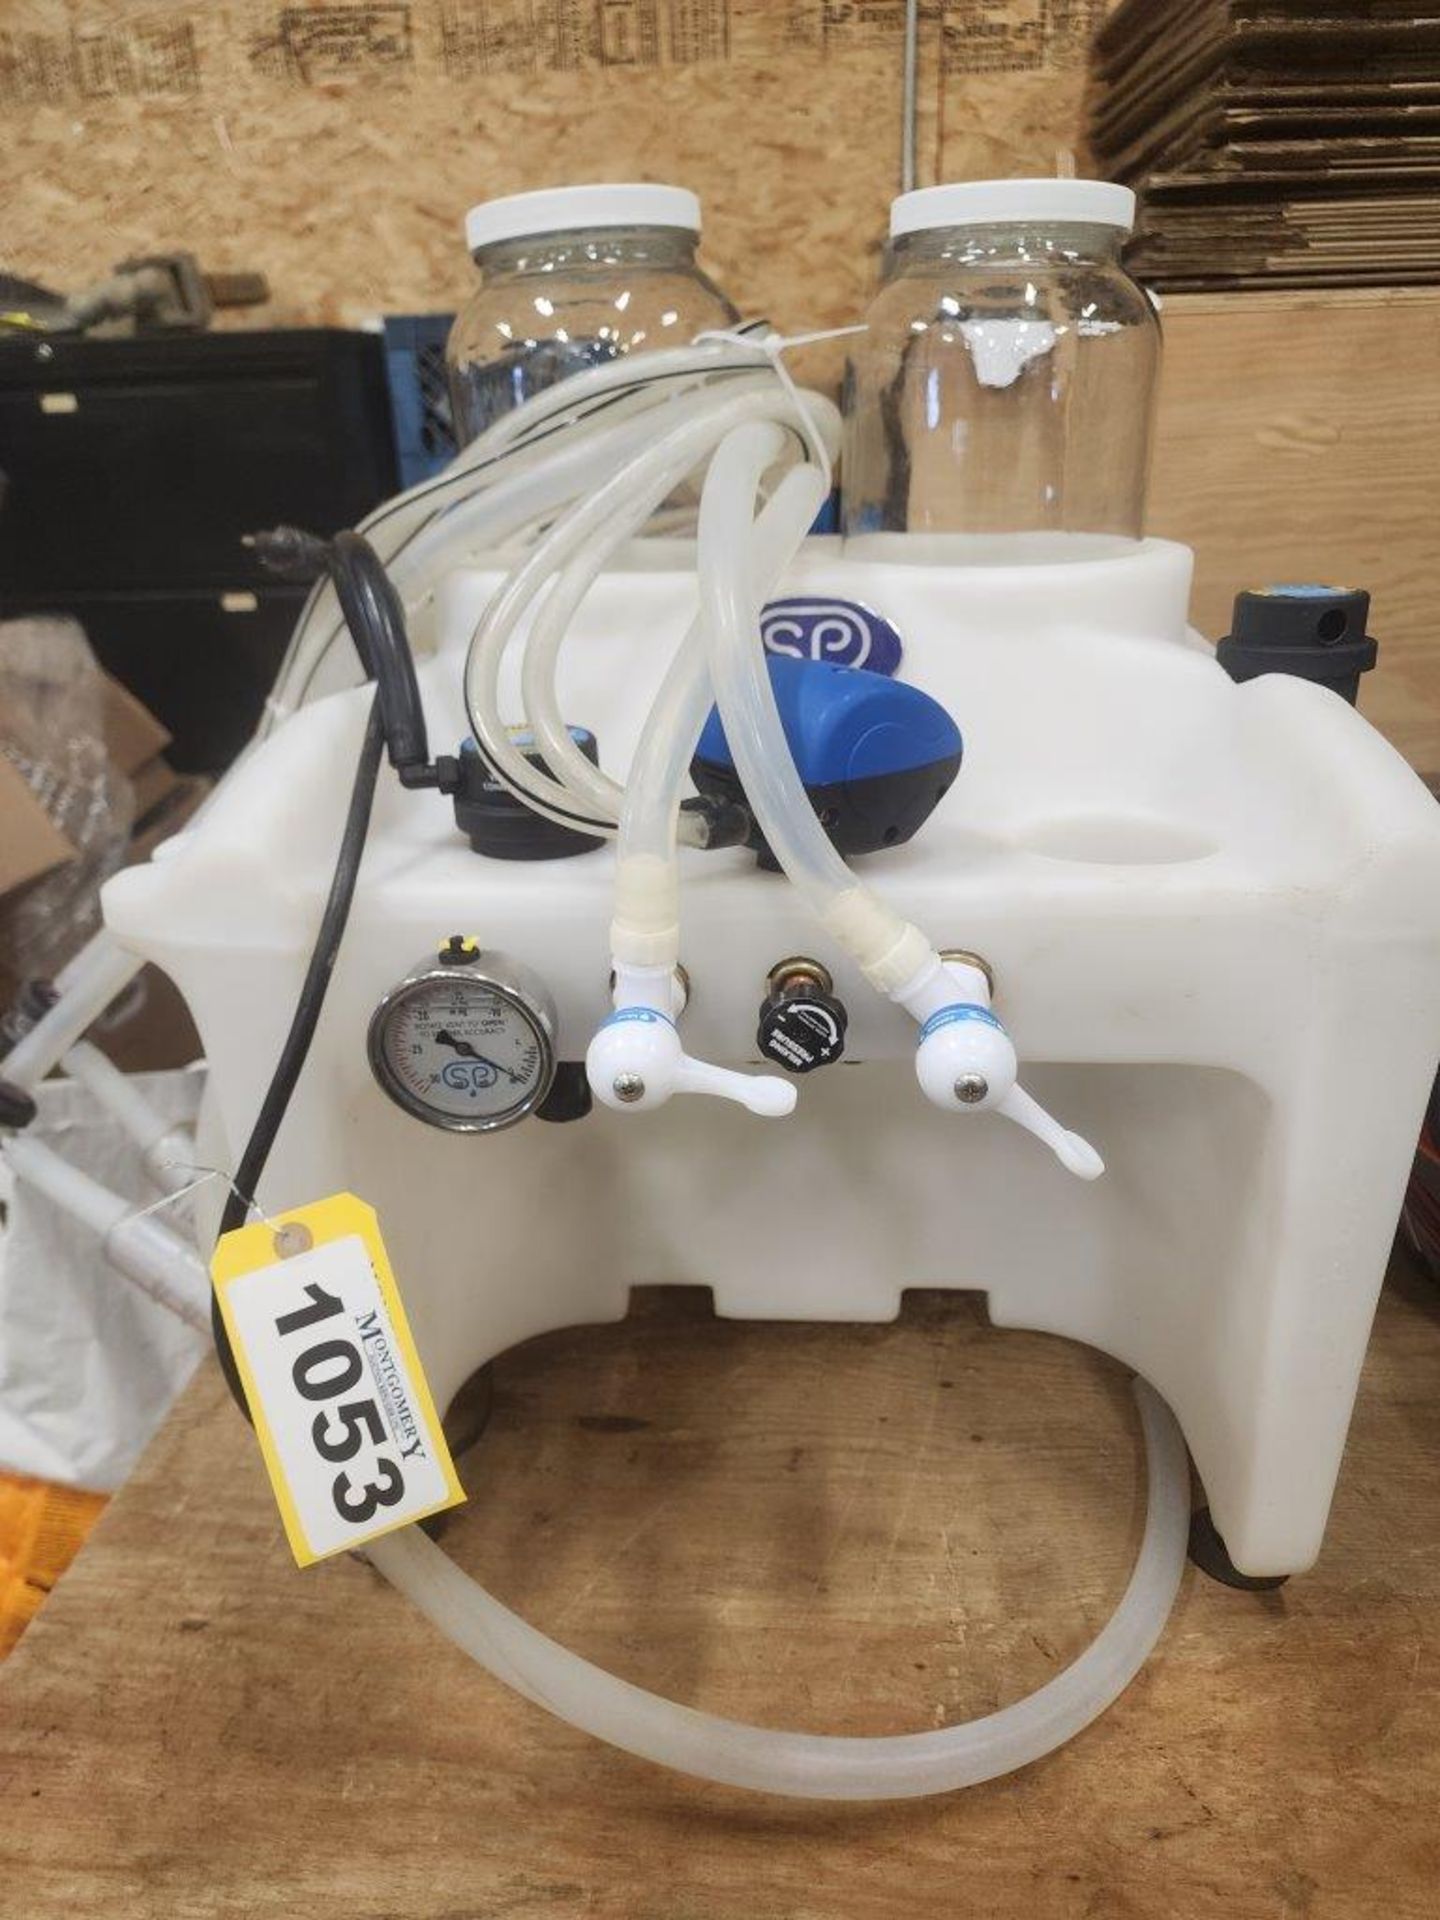 SIMPLY PULSE PORTABLE MILKING SYSTEM W/ ACCESSORIES - NEW IN 2022 - SET UP FOR COWS AND CAN ALSO